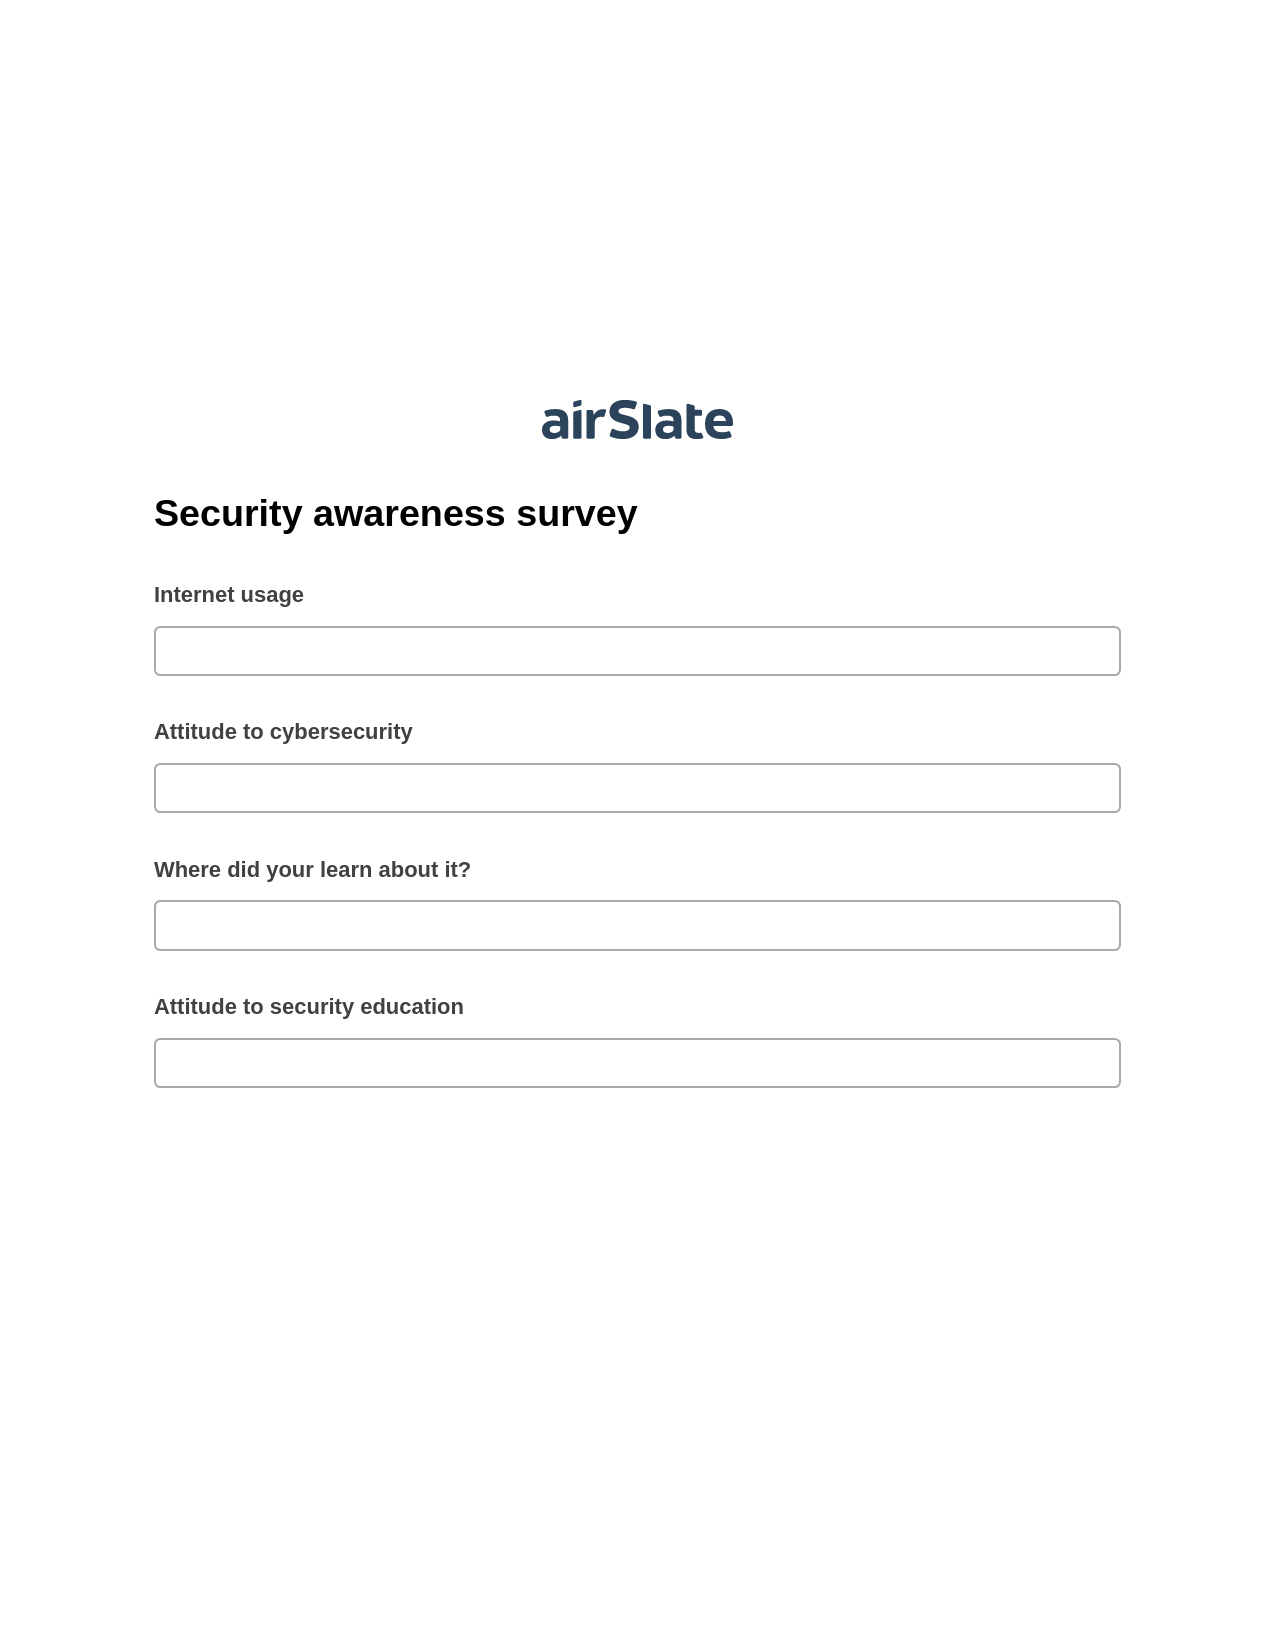 Security awareness survey Pre-fill from CSV File Dropdown Options Bot, Email Notification Bot, Post-finish Document Bot